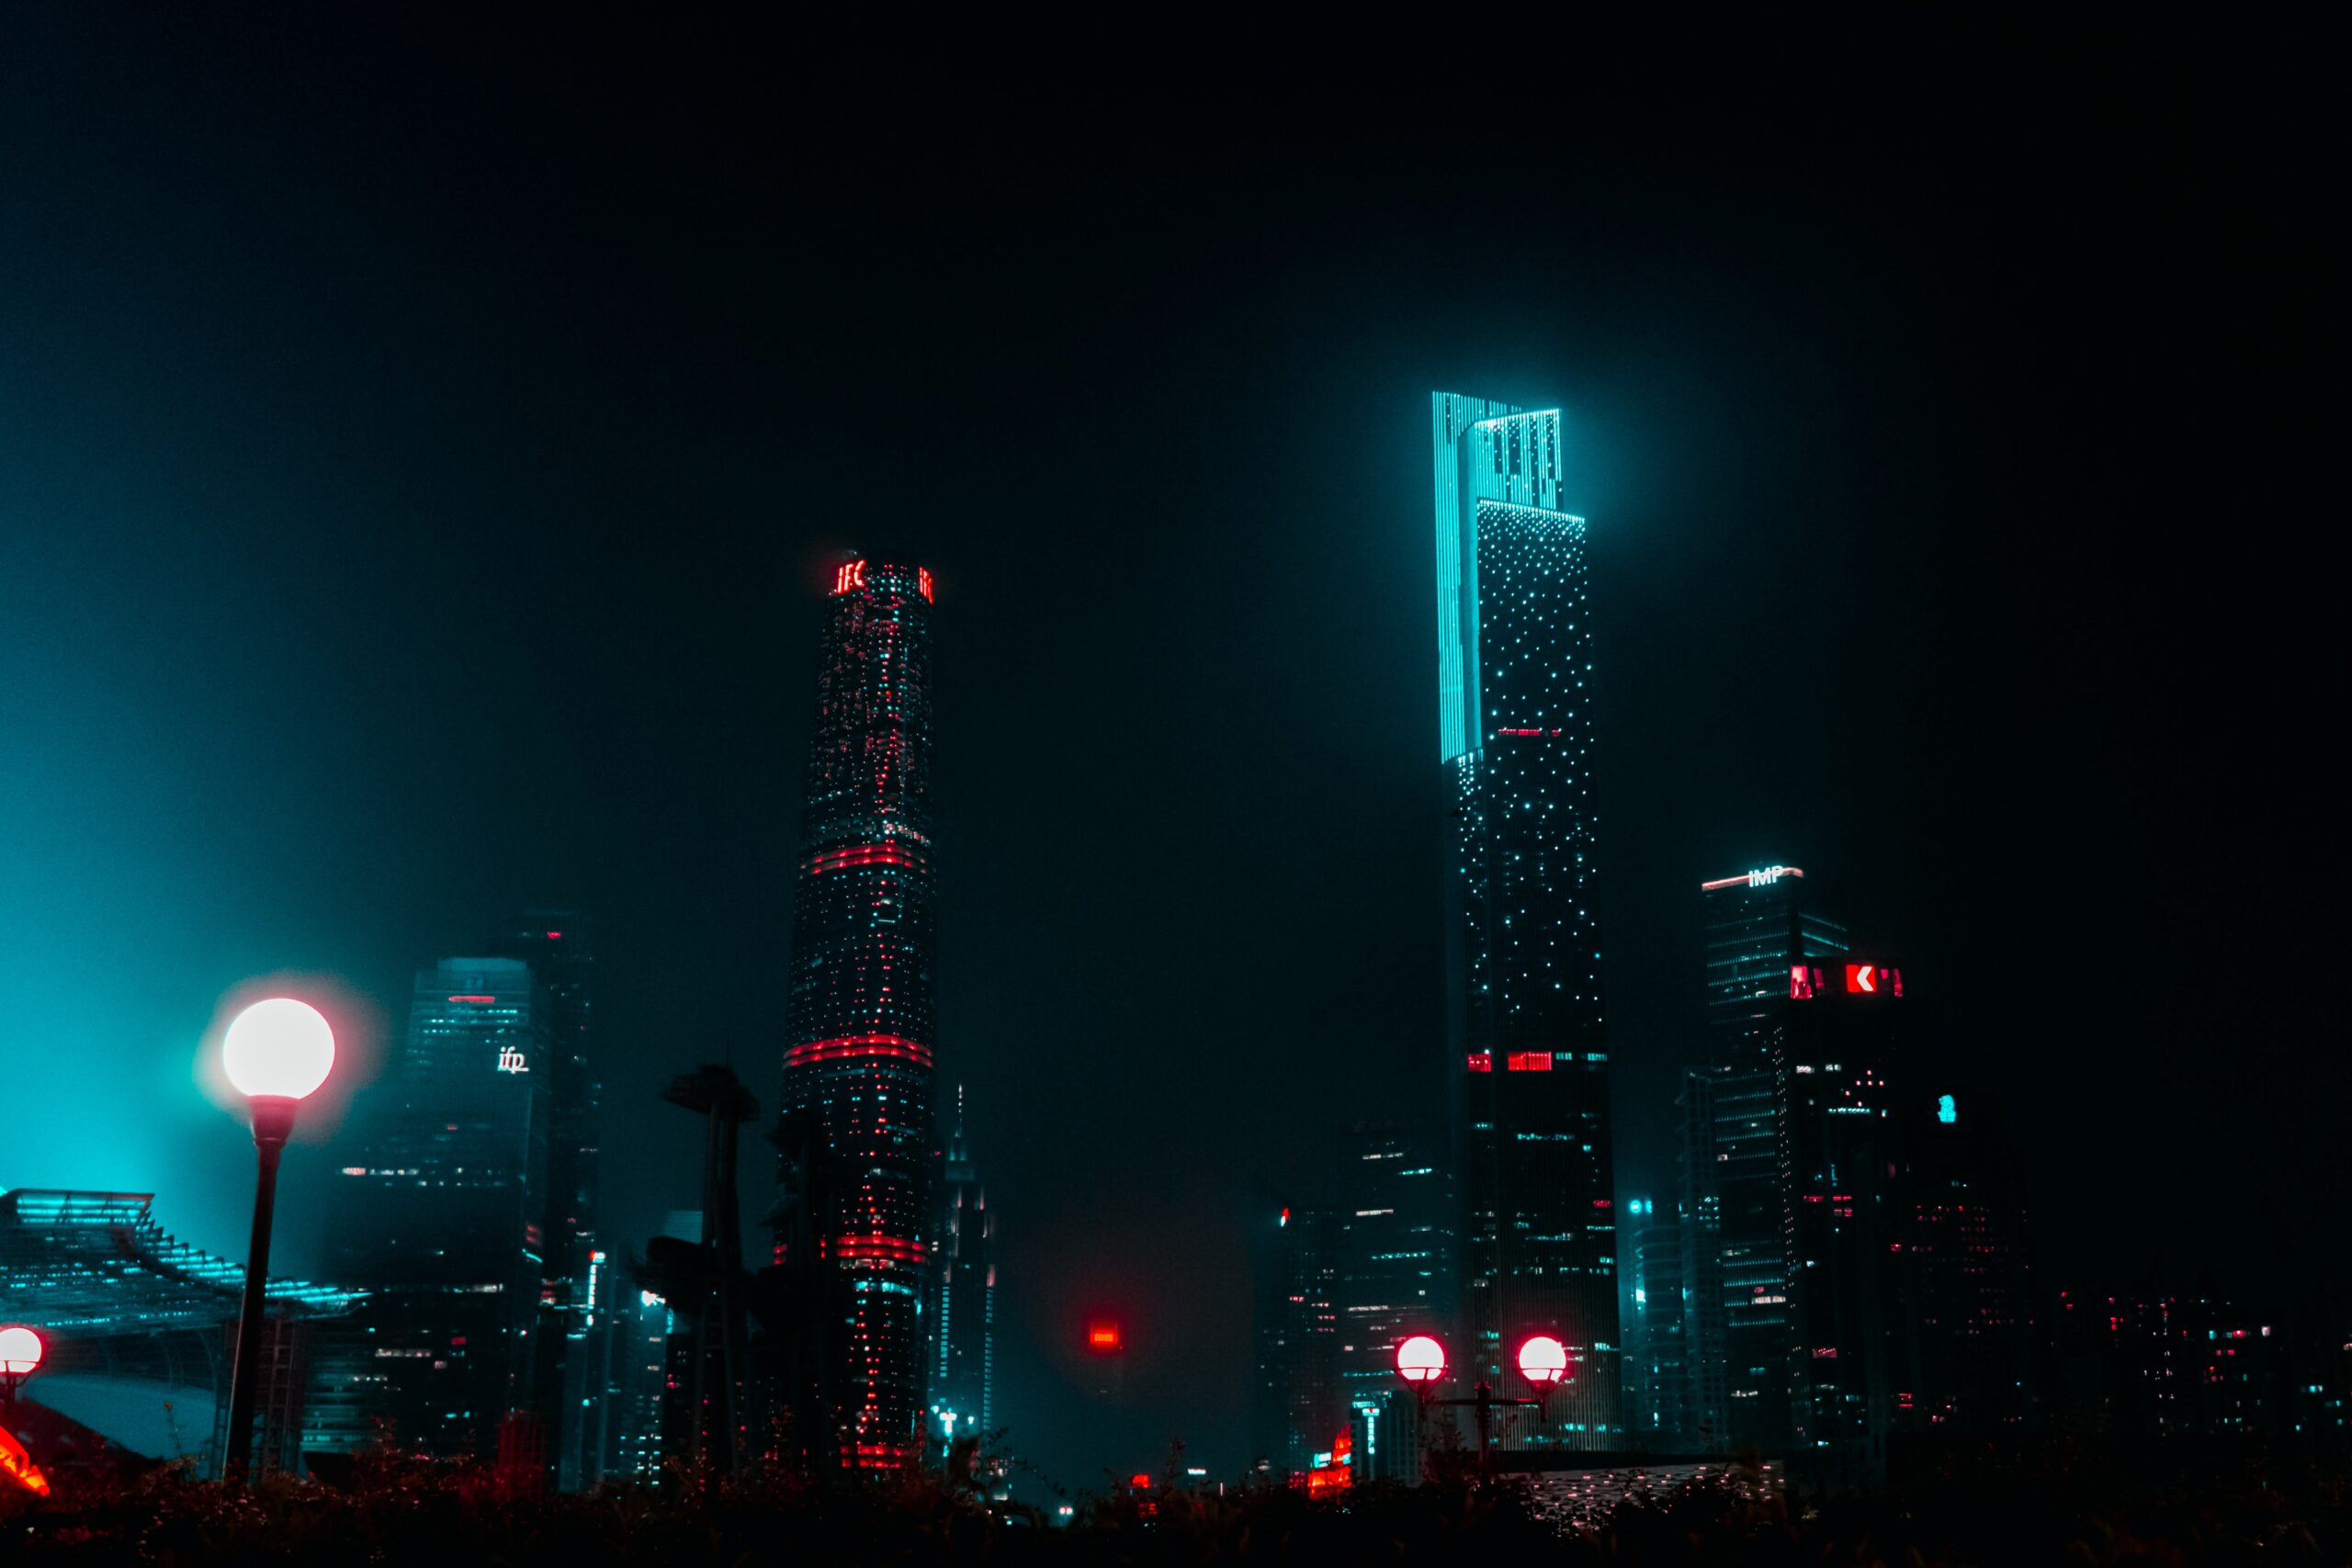 Futuristic city scape with bright, neon lights highlighting tall buildings during the night | Inoapps modernization